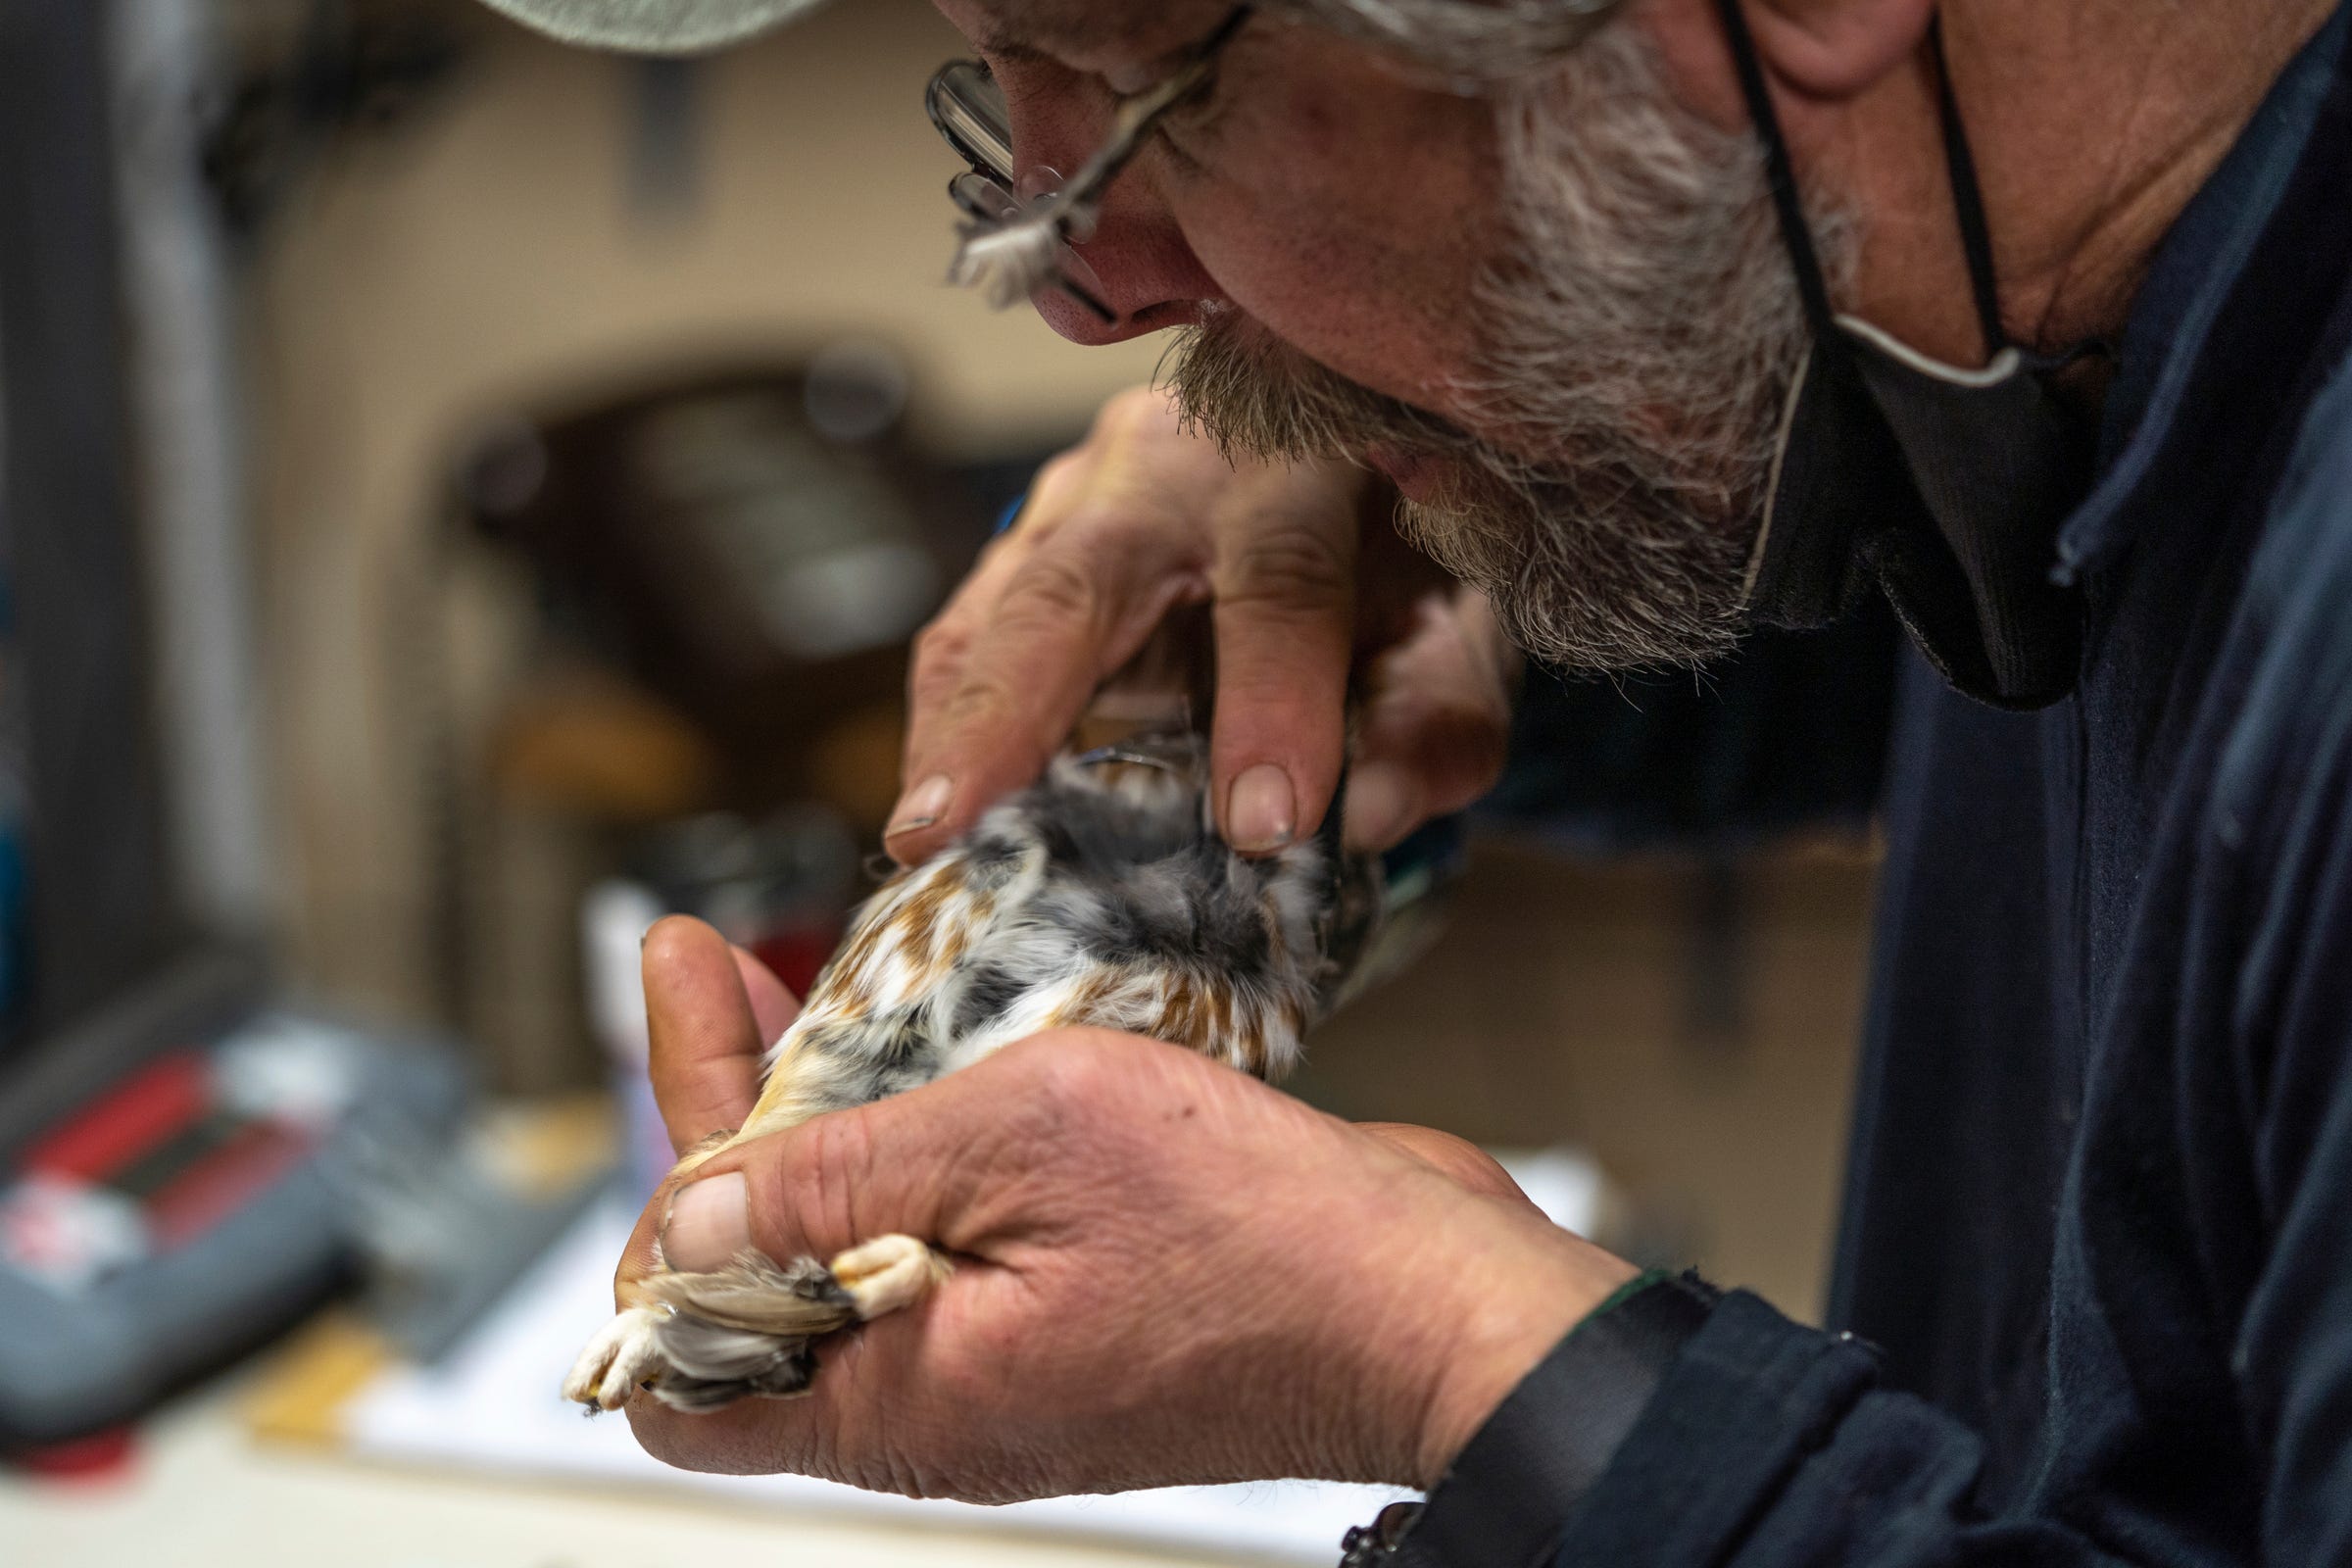 Owl bander Chris Neri blows on the feathers of a Northern Saw-whet owl while checking the furcular hollow where fat is stored while documenting and banding owls captured at the Whitefish Point Bird Observatory in Paradise located in Michigan's Upper Peninsula on Friday, April 21, 2023, during their spring migration through the area along Lake Superior.